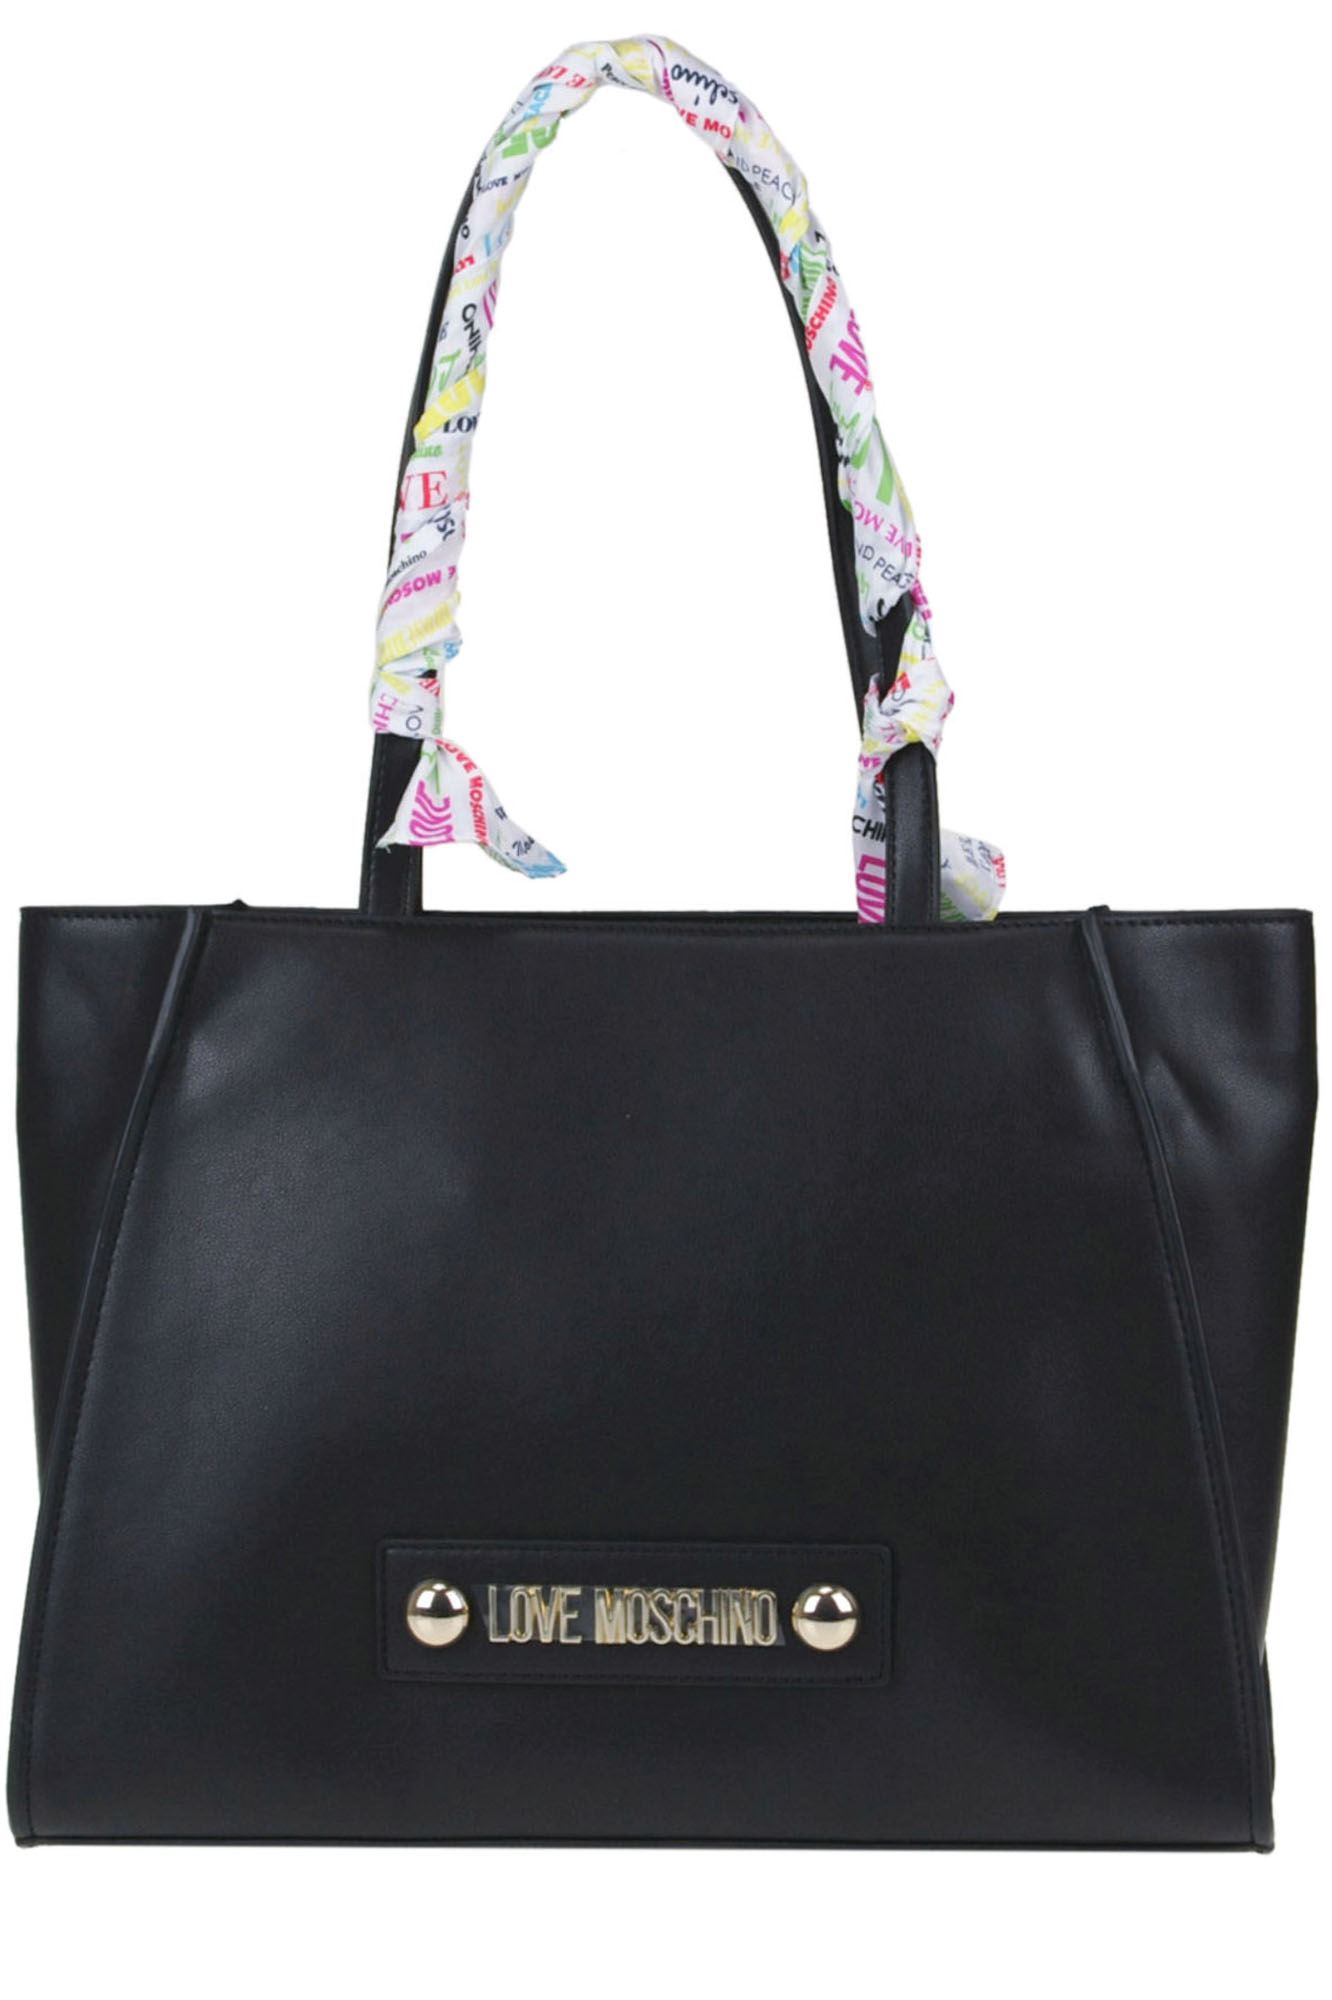 Love Moschino ECO-LEATHER TOTE BAG